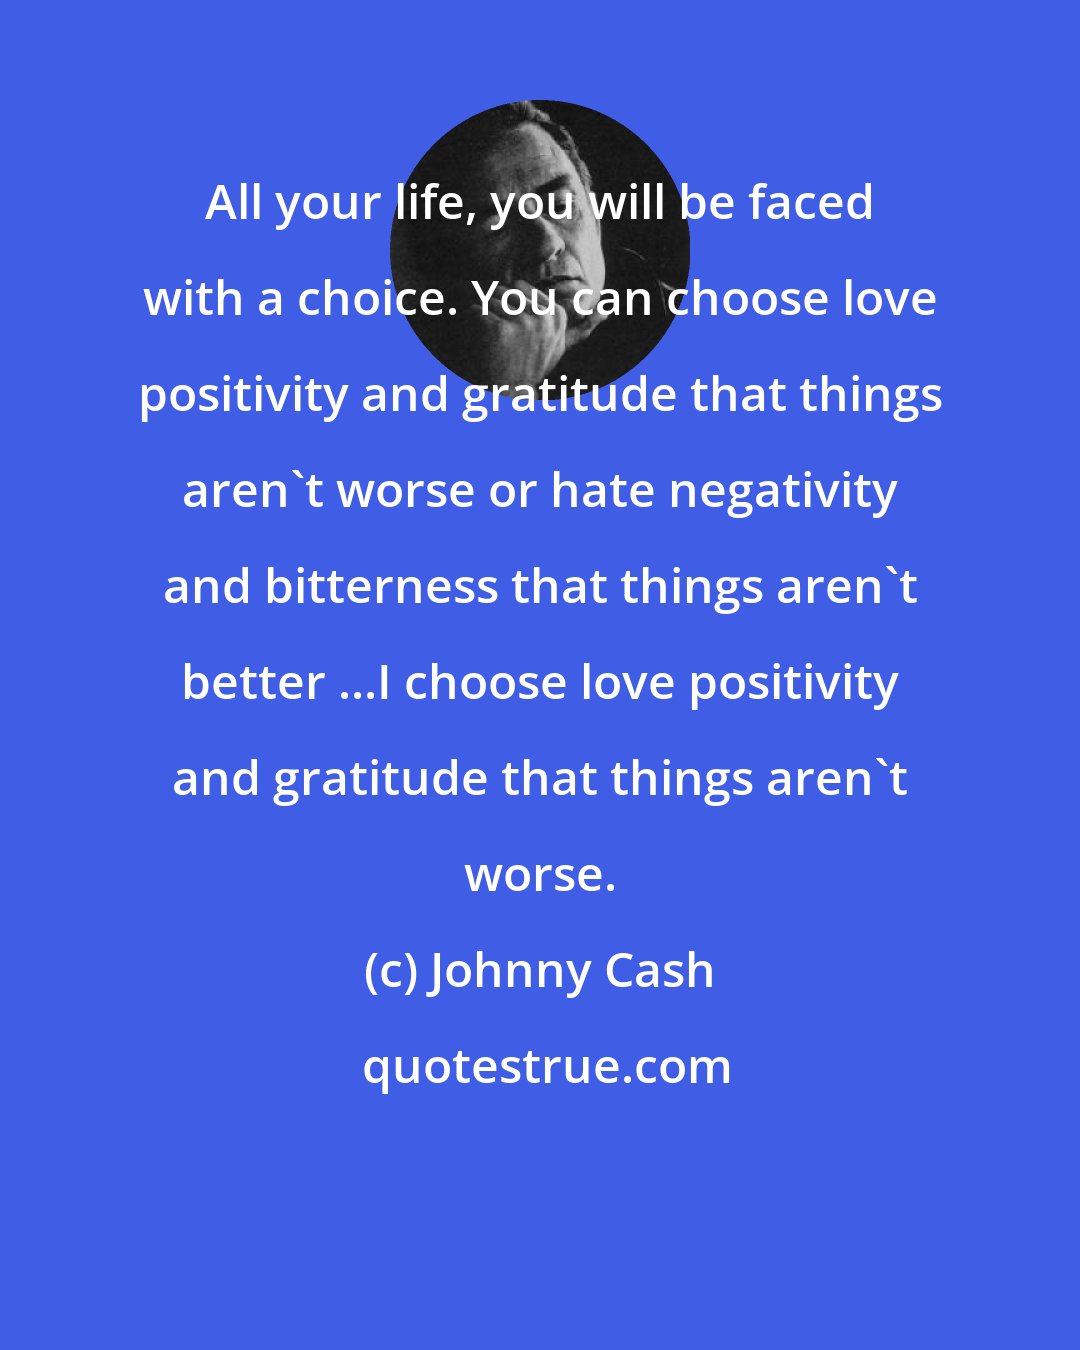 Johnny Cash: All your life, you will be faced with a choice. You can choose love positivity and gratitude that things aren't worse or hate negativity and bitterness that things aren't better ...I choose love positivity and gratitude that things aren't worse.